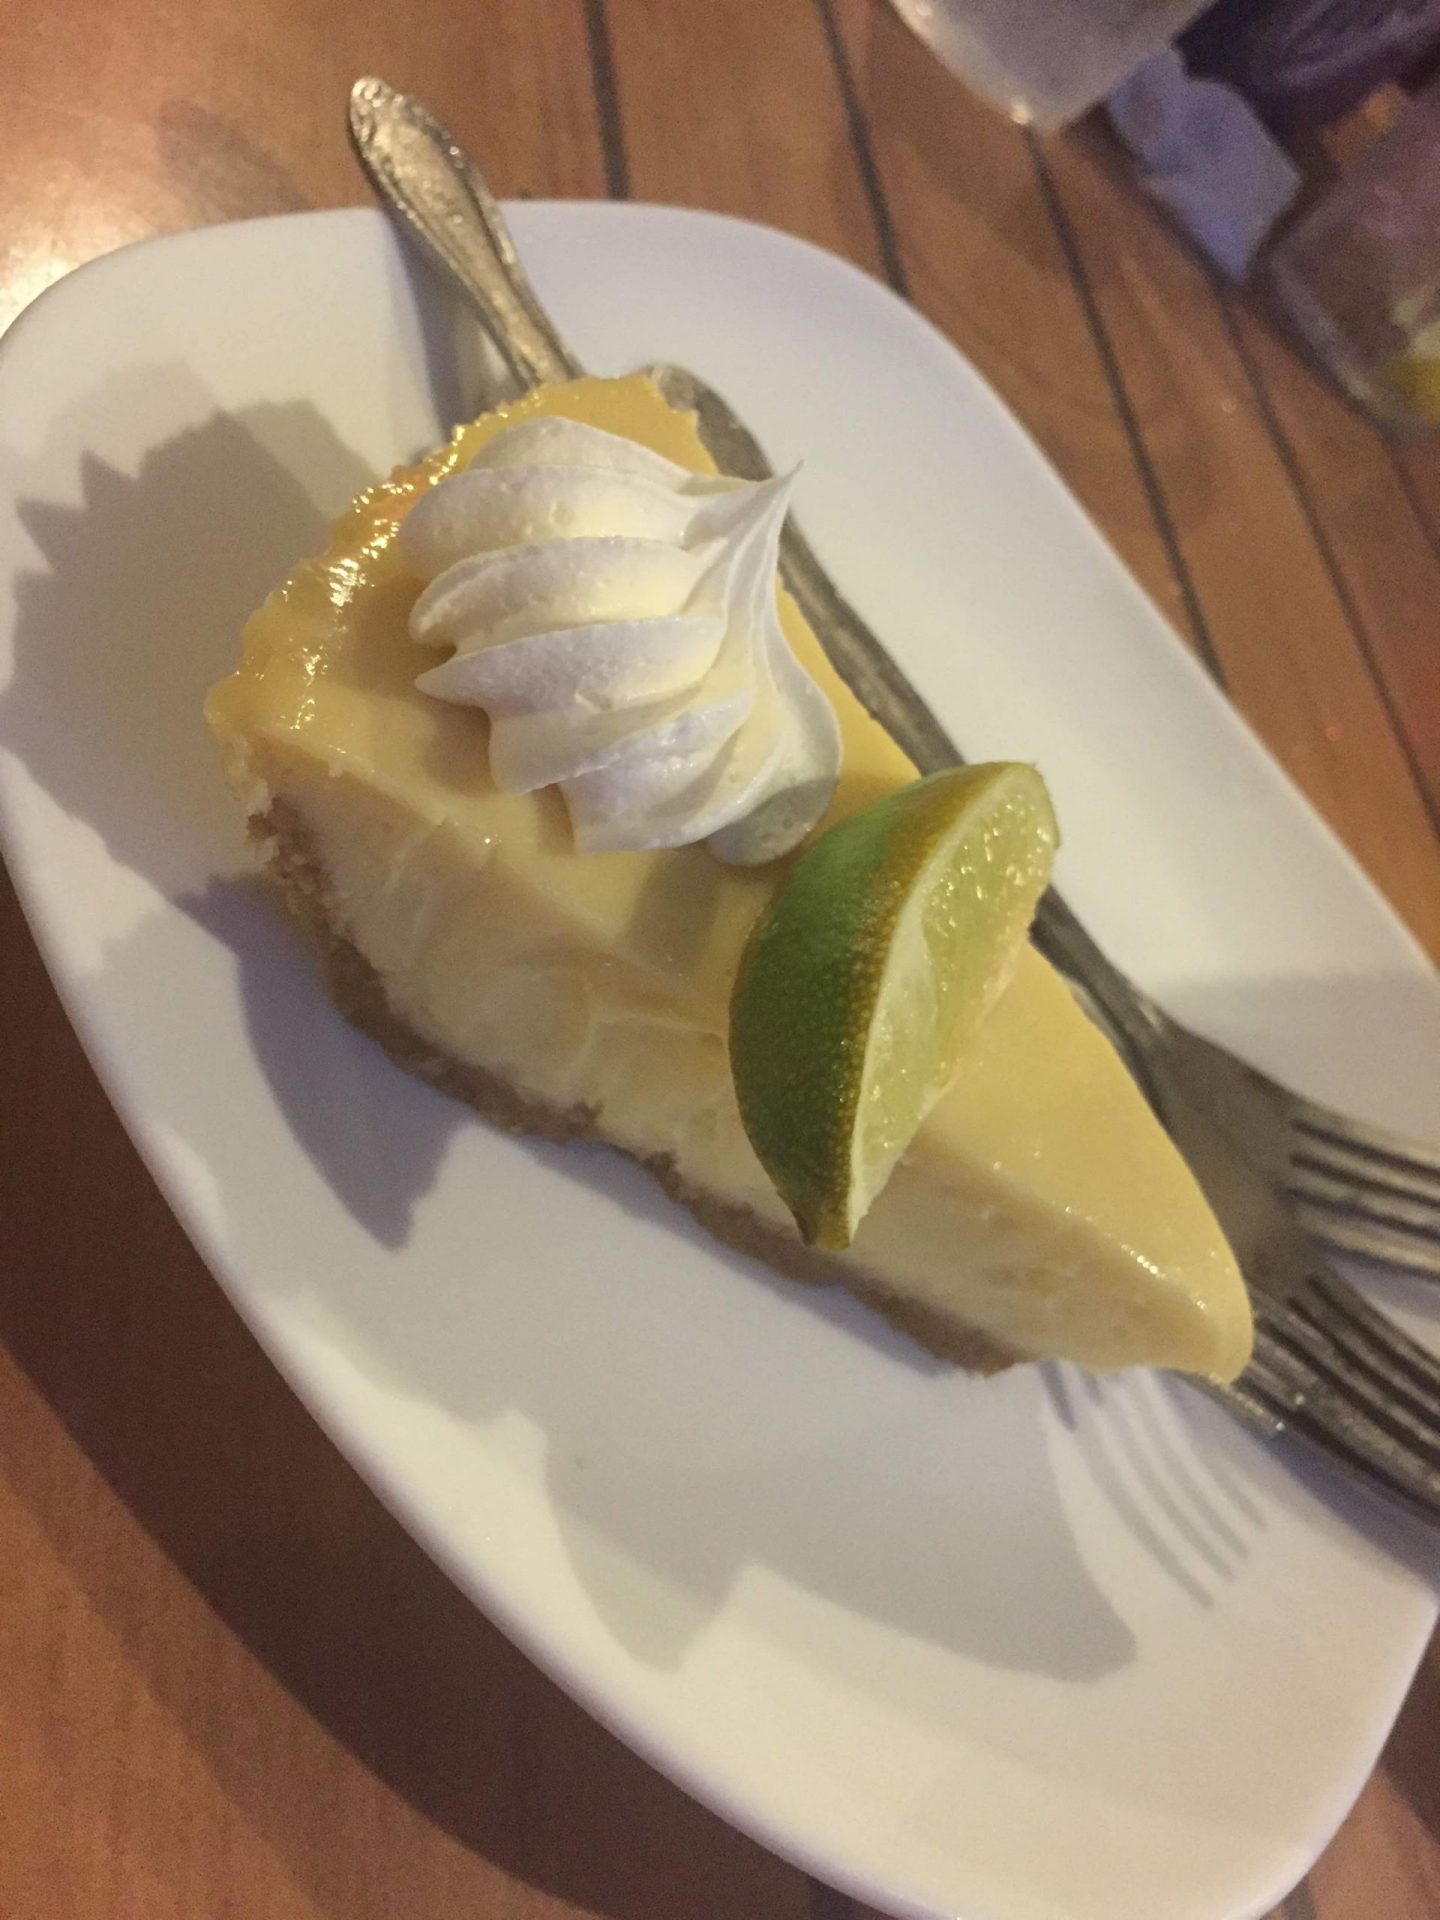 Key lime pie at Crabby Bill's